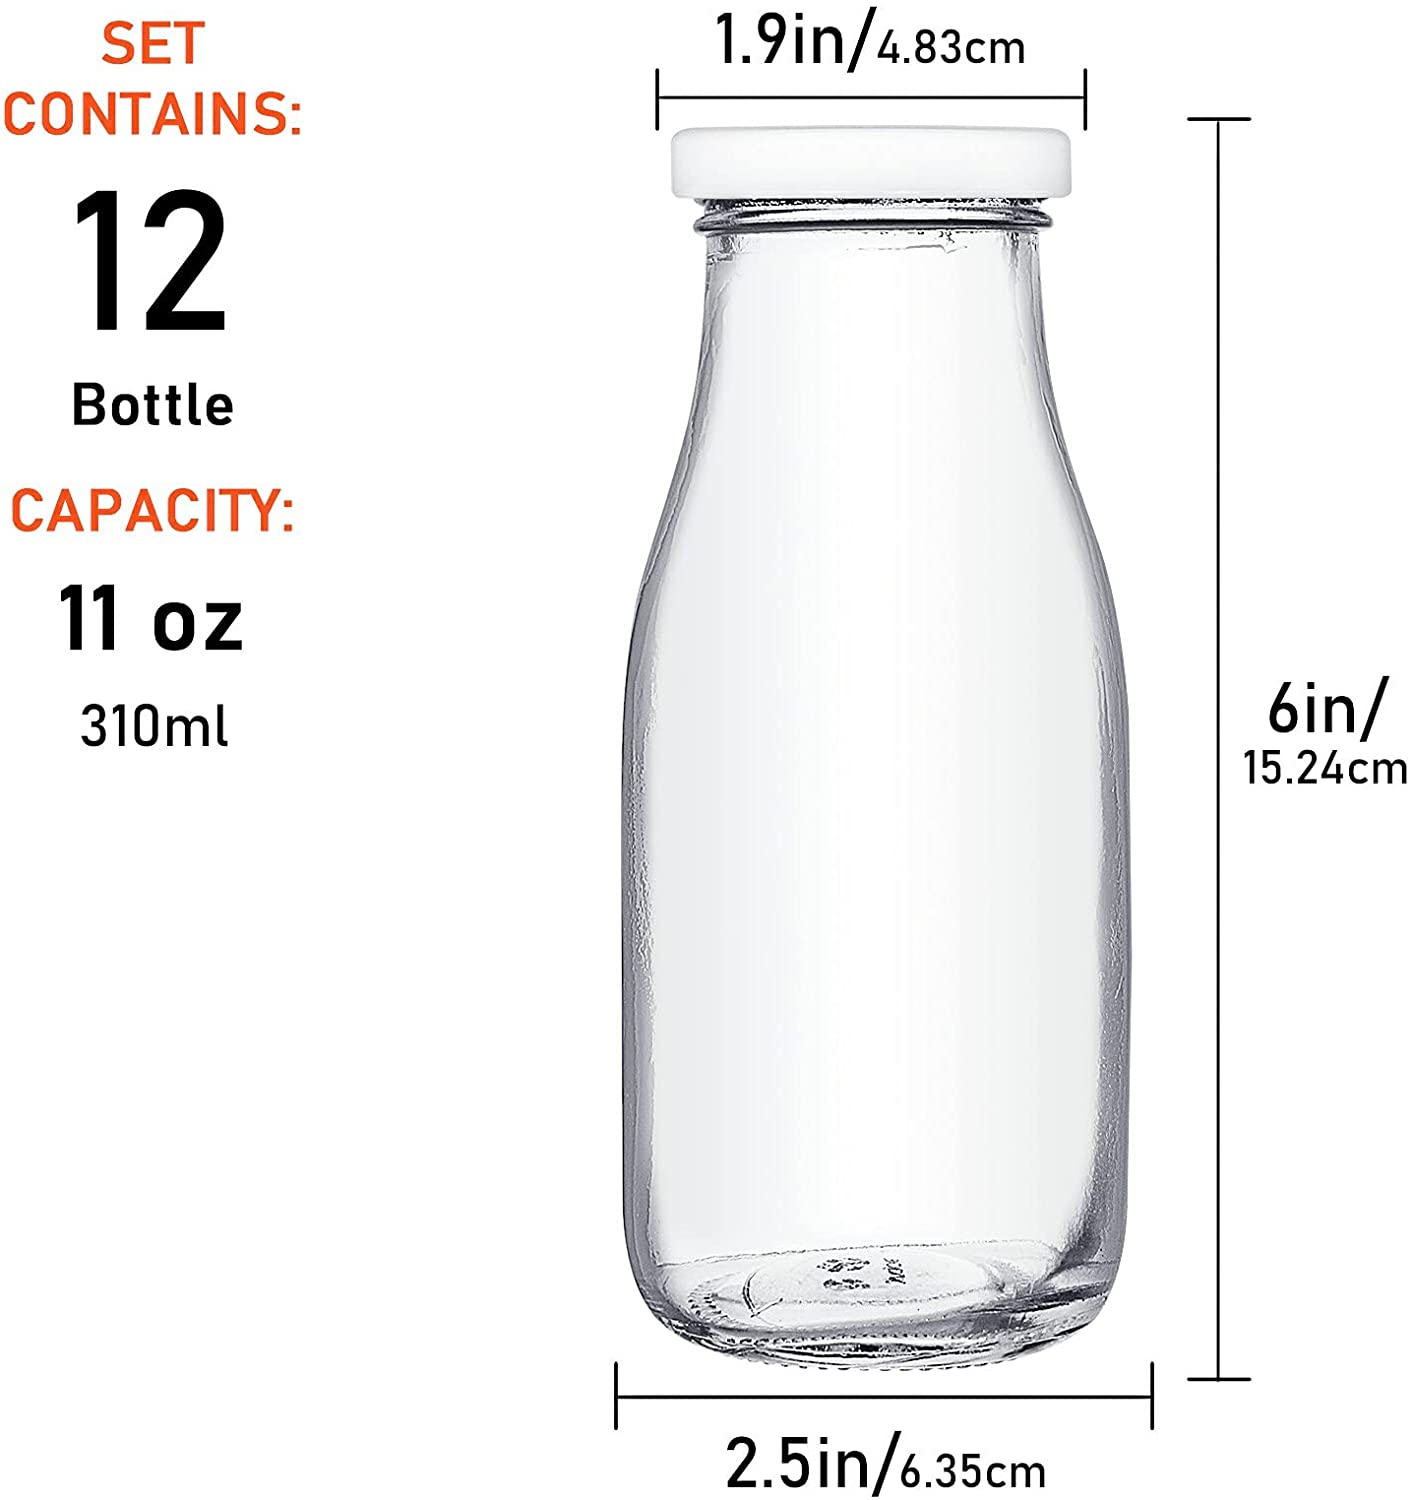 11oz Glass Milk Bottles with Reusable Metal Twist Lids and Straws for Beverage Glassware and Drinkware Parties